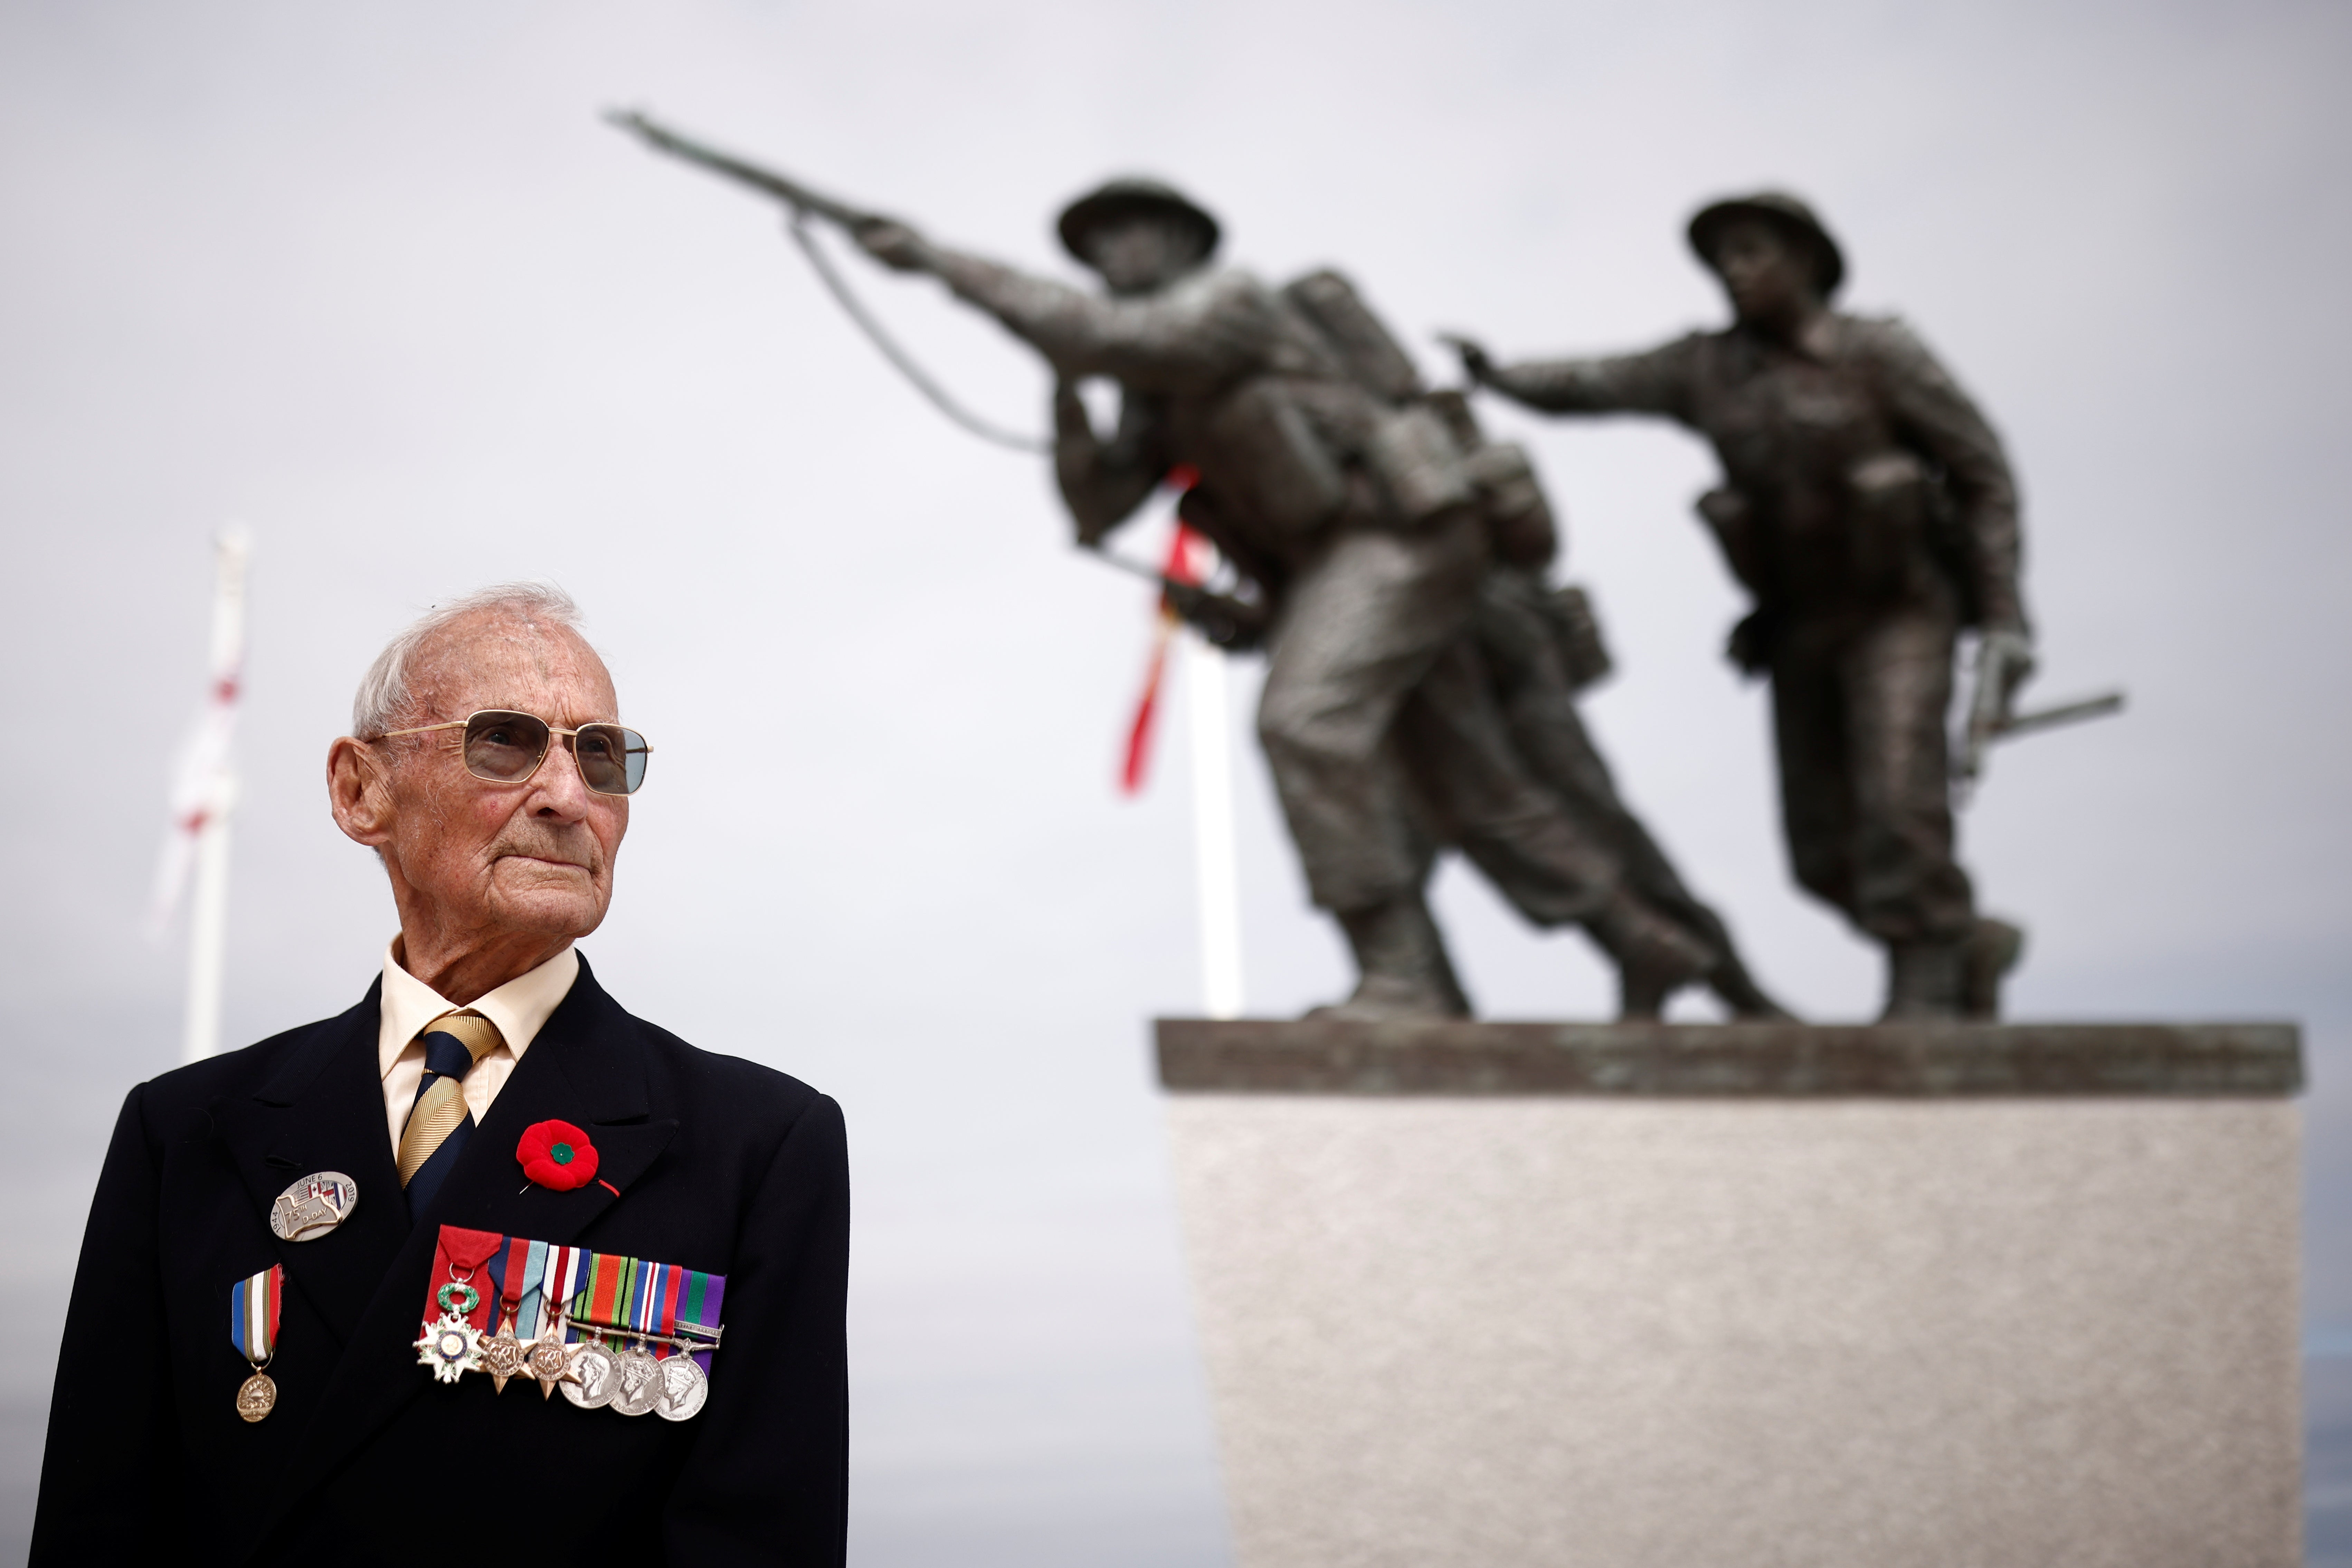 David Mylchreest, a 97-year-old British veteran of the Normandy campaign, was the only veteran to attend the opening of the Normandy Memorial